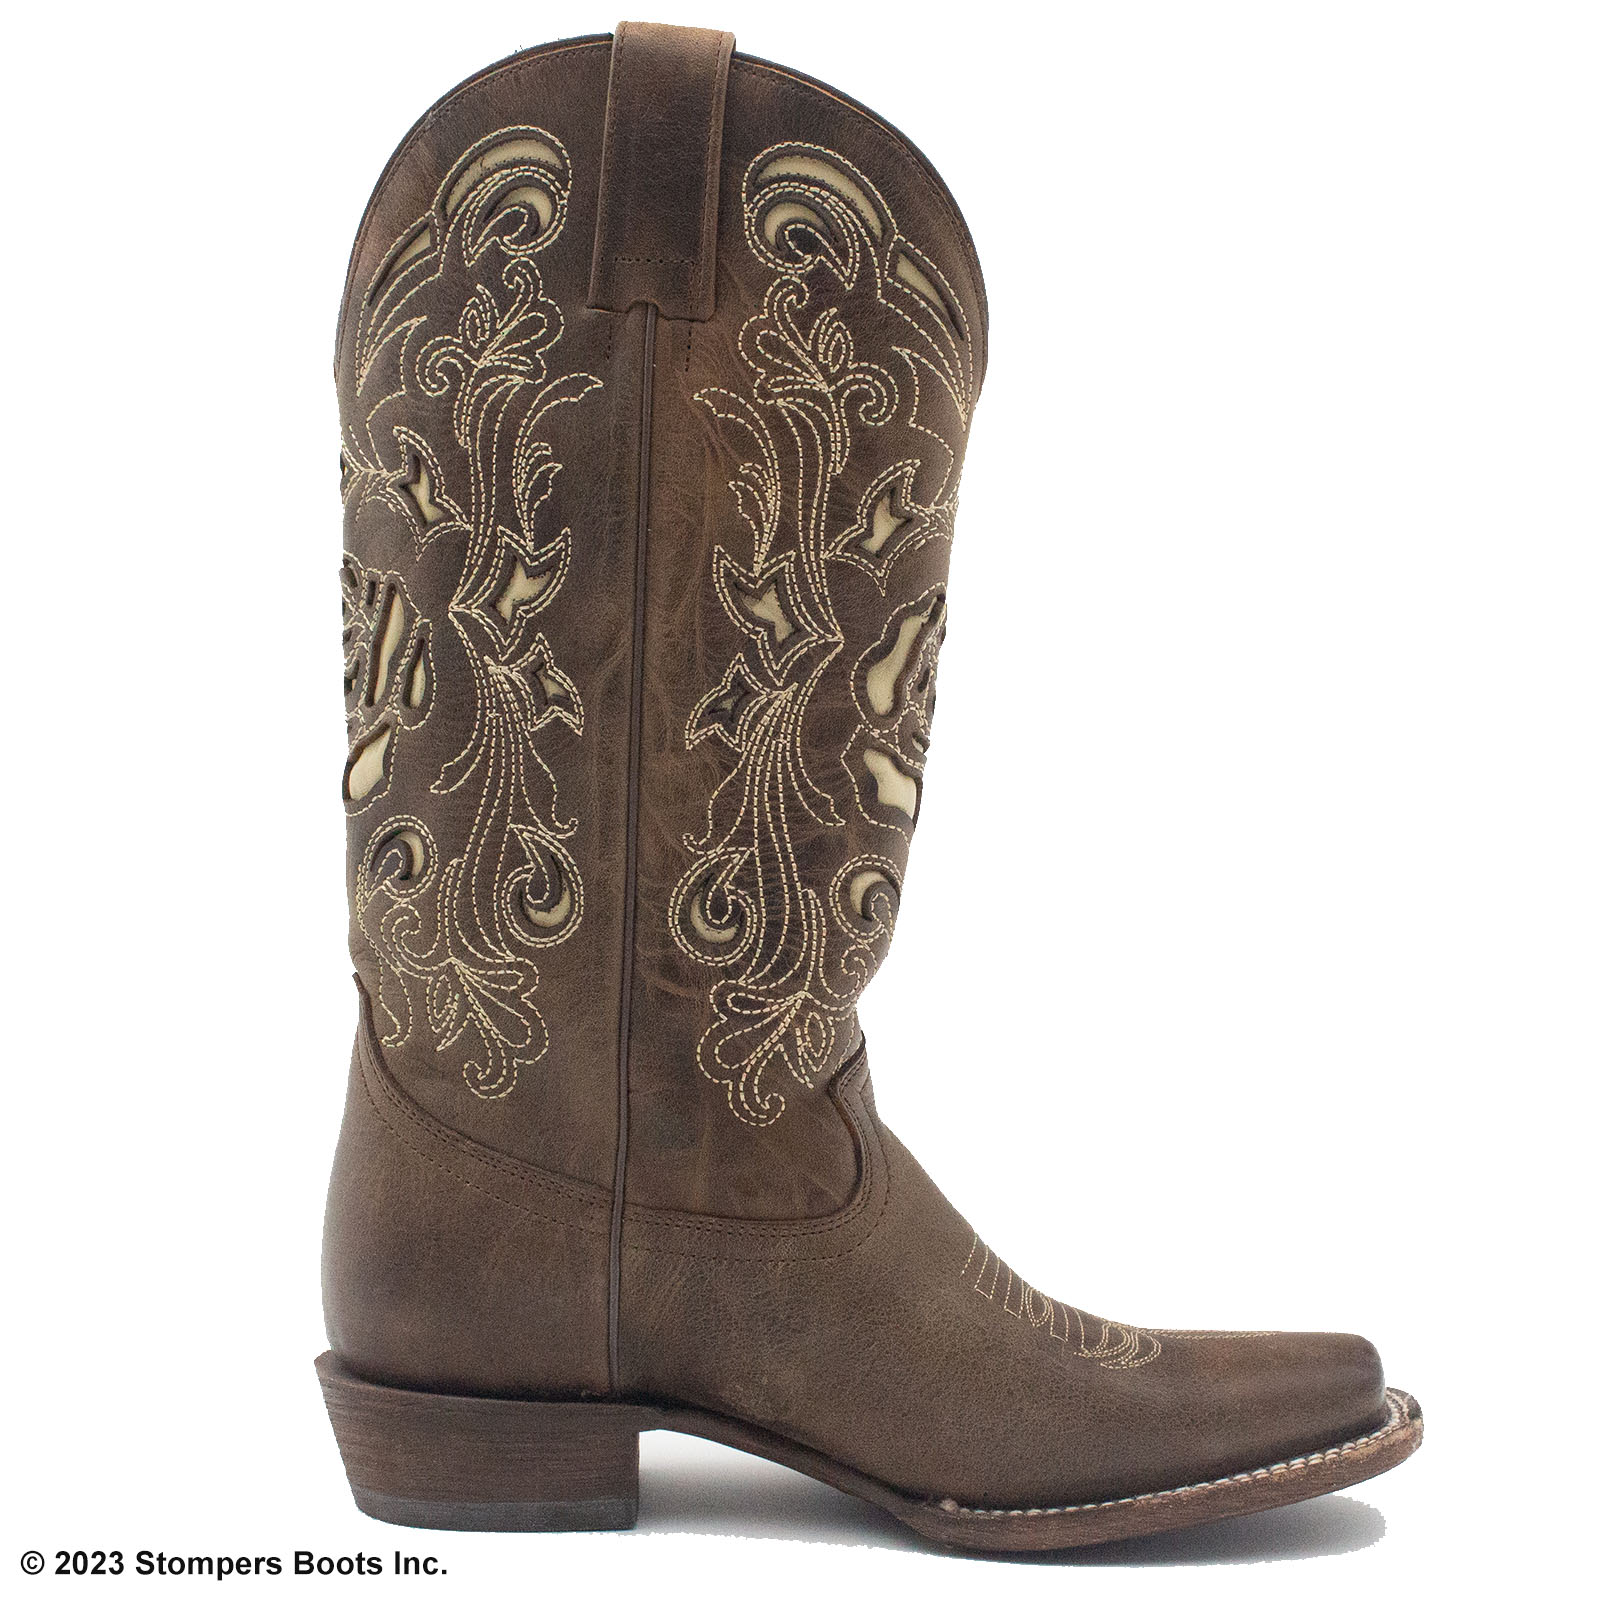 https://stompersboots.com/wp-content/uploads/Products/97331448-JB-Dillon-Womens-Brown-Cowboy-Boots-Size-8-5-B/97331448-JB-Dillon-Womens-Brown-Cowboy-Boots-Size-8-5-B-Medial-Left.jpg